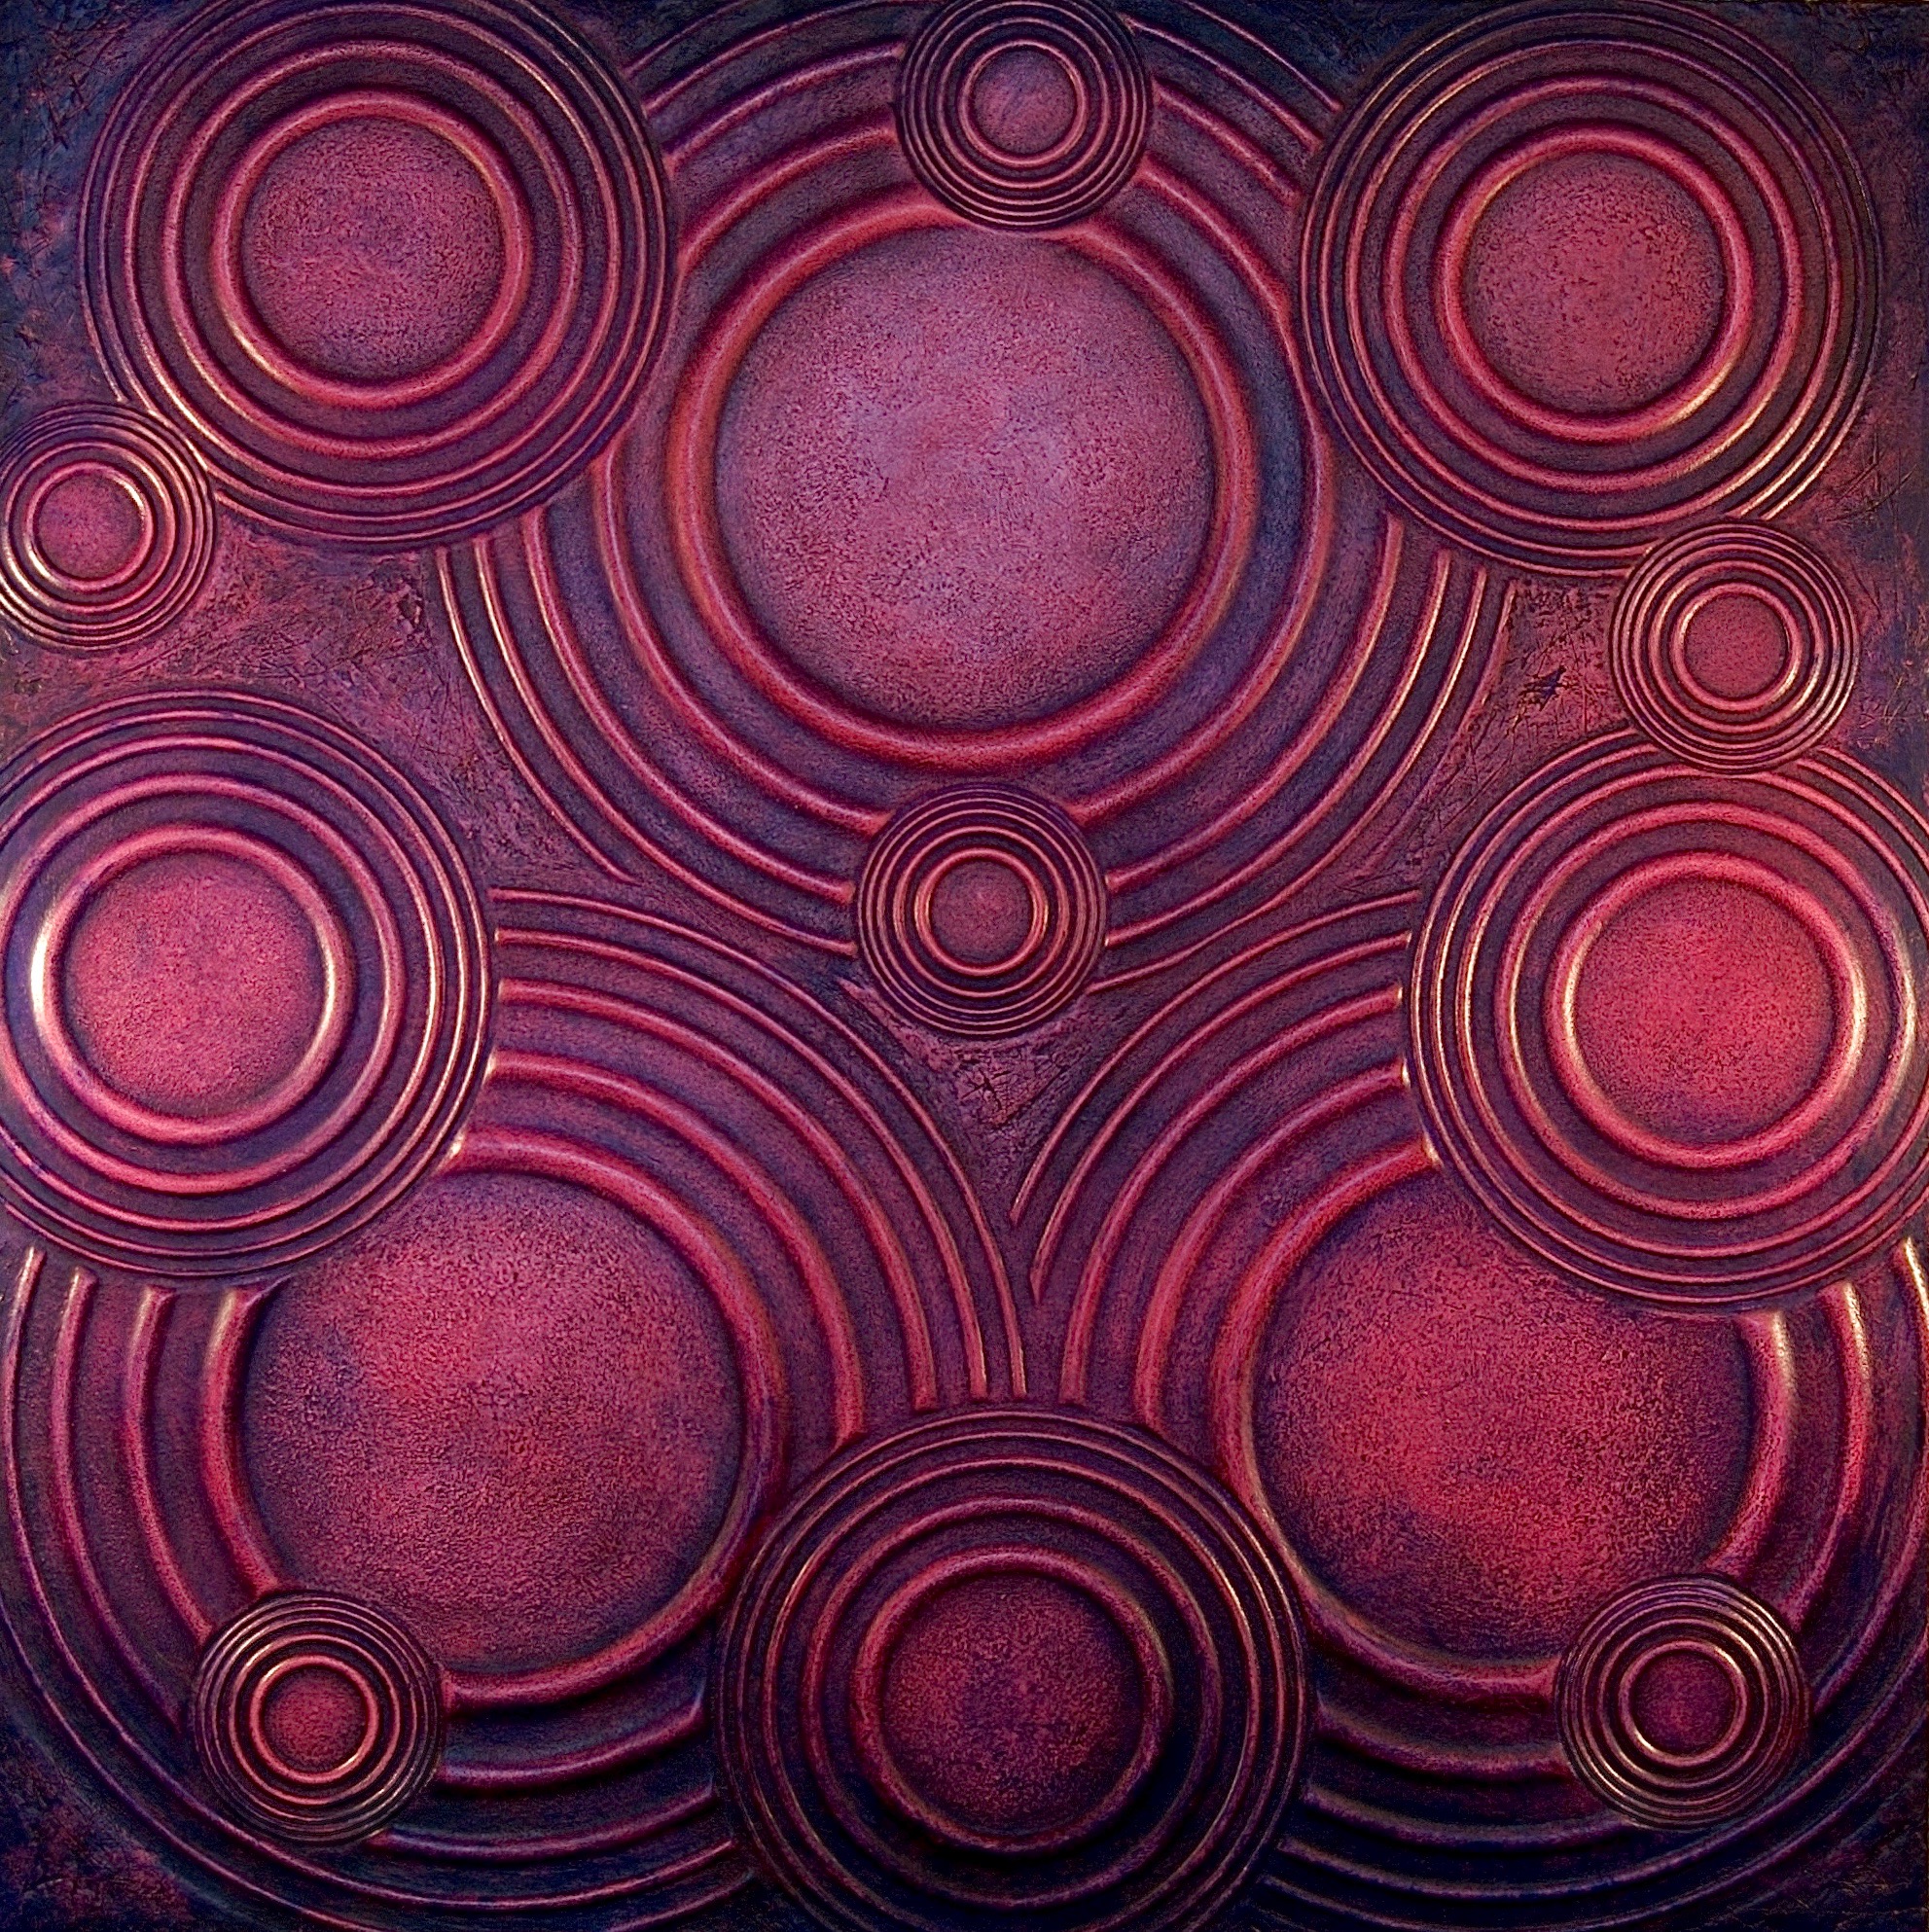 Thomas Coffin - Ripple Effect (purple), 36"h x 36"w x 2"d, mixed media sculptural wall relief